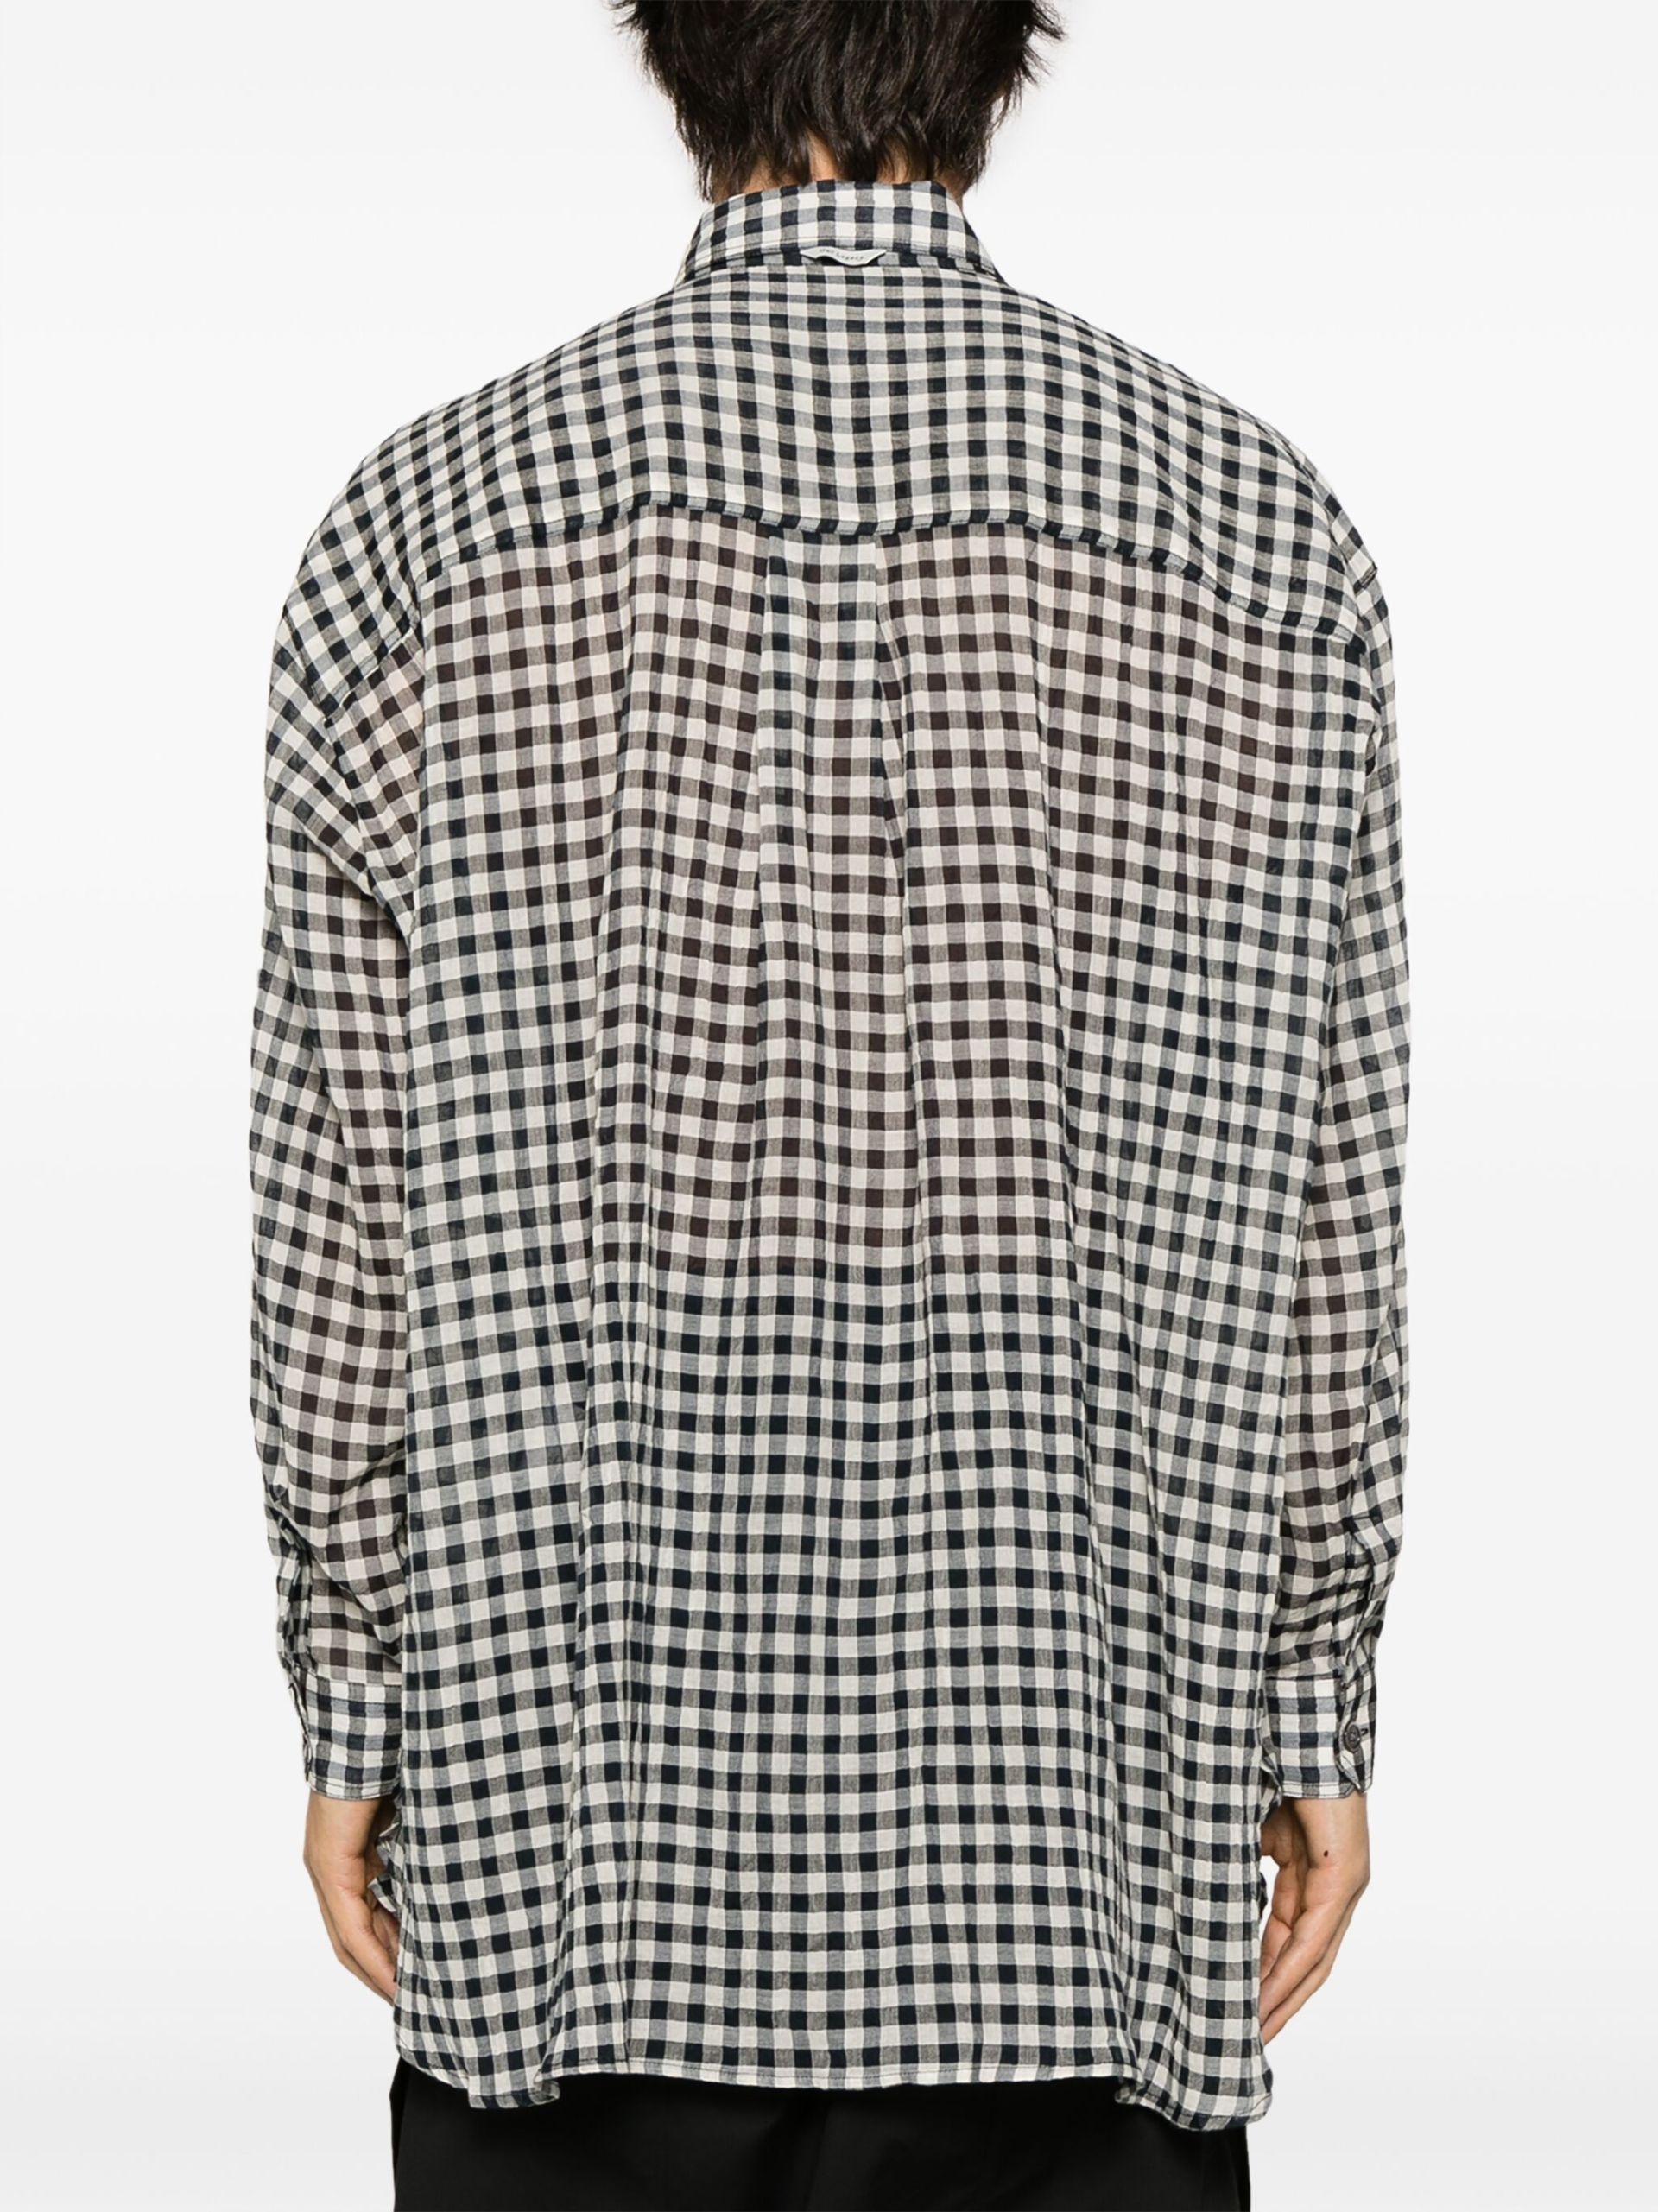 Black And White Darling Checked Cotton Shirt - 4